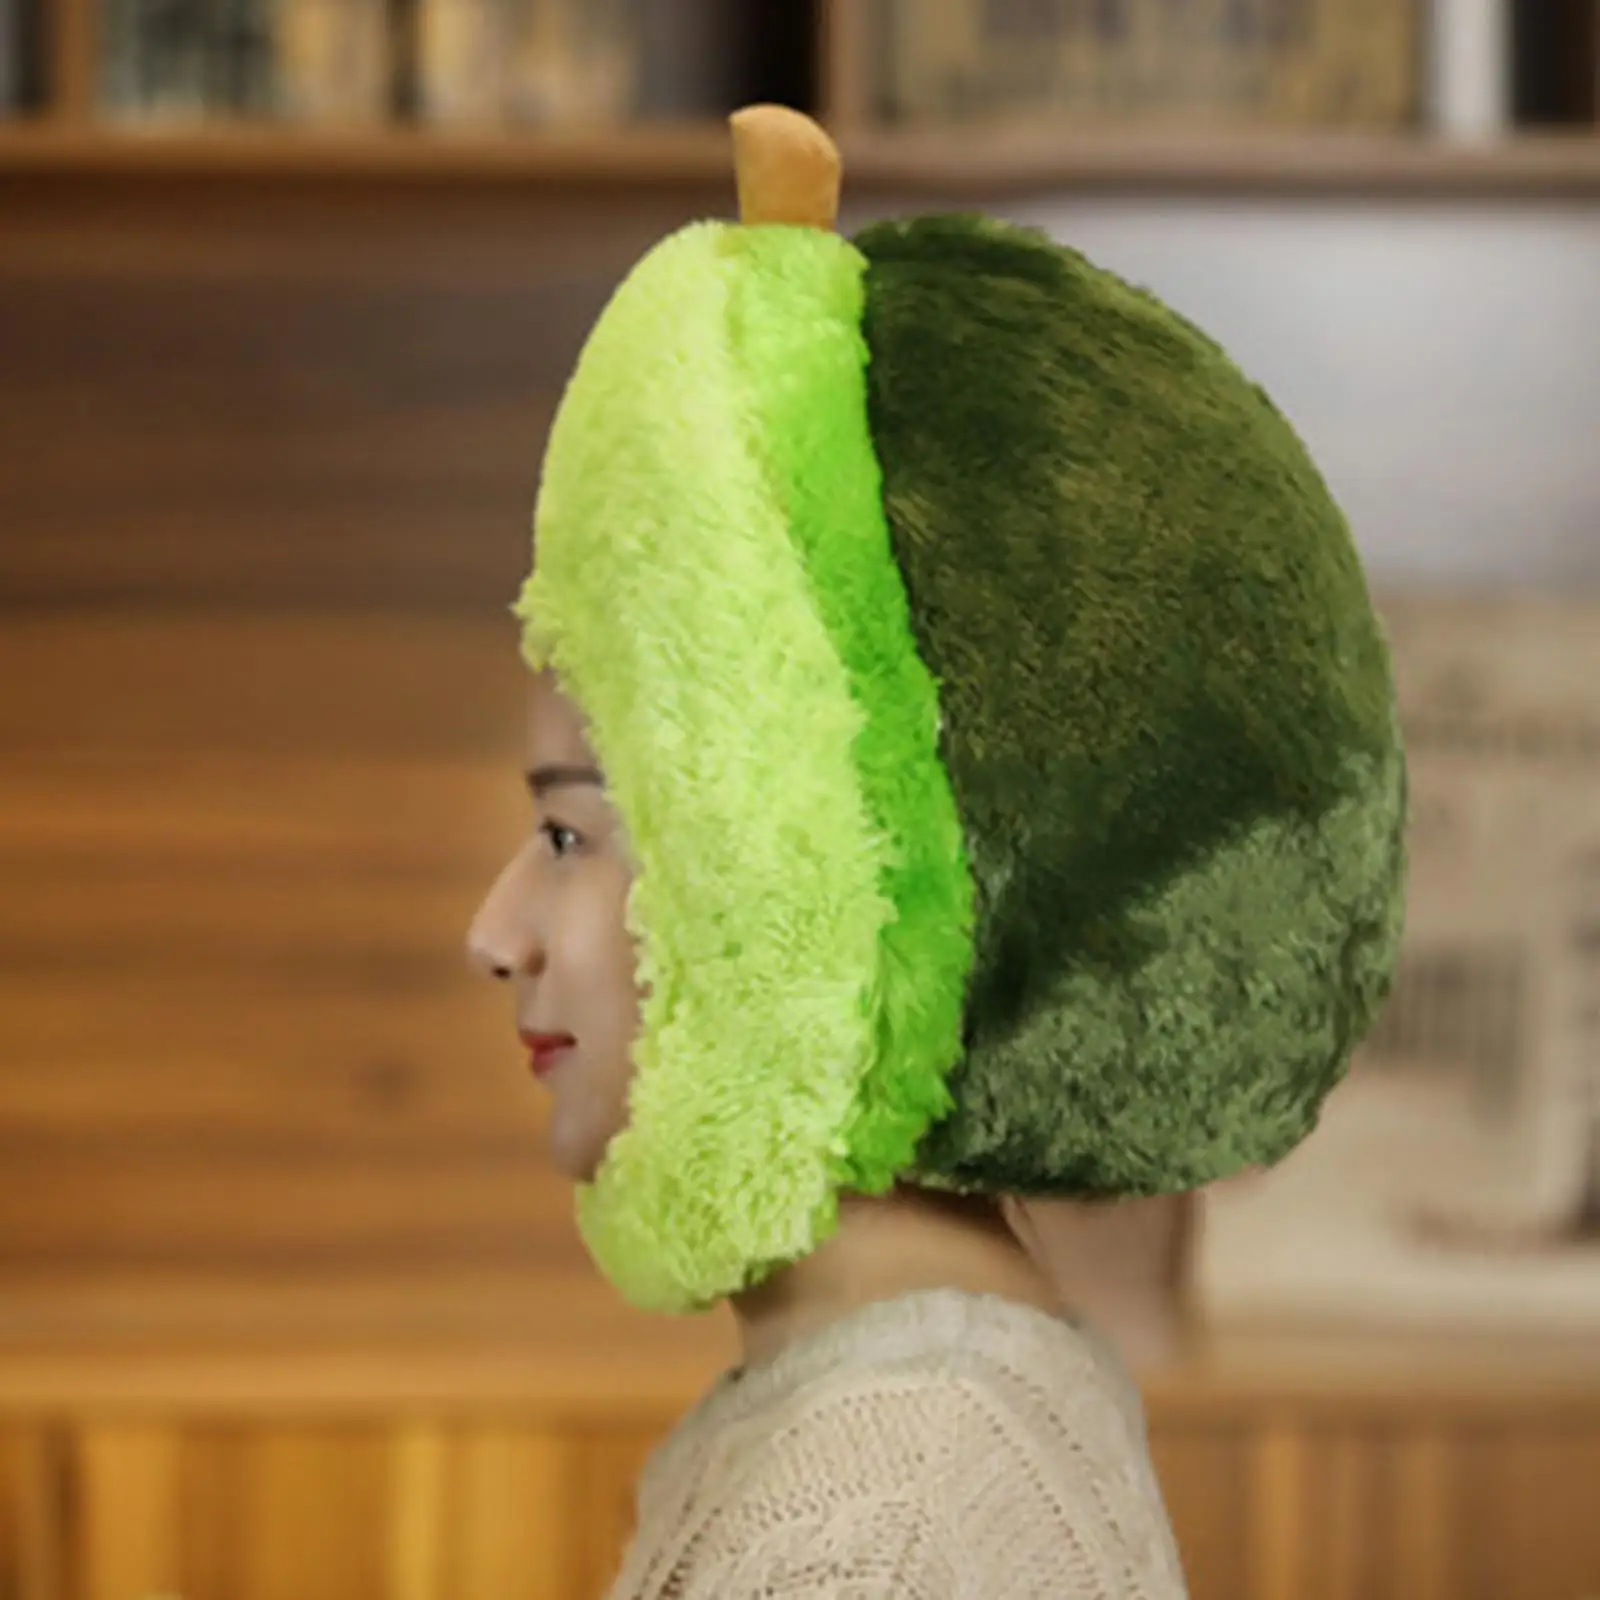 Plush Fruit Headgear Hat Photo Props Cosplay Decorative Gifts for Women